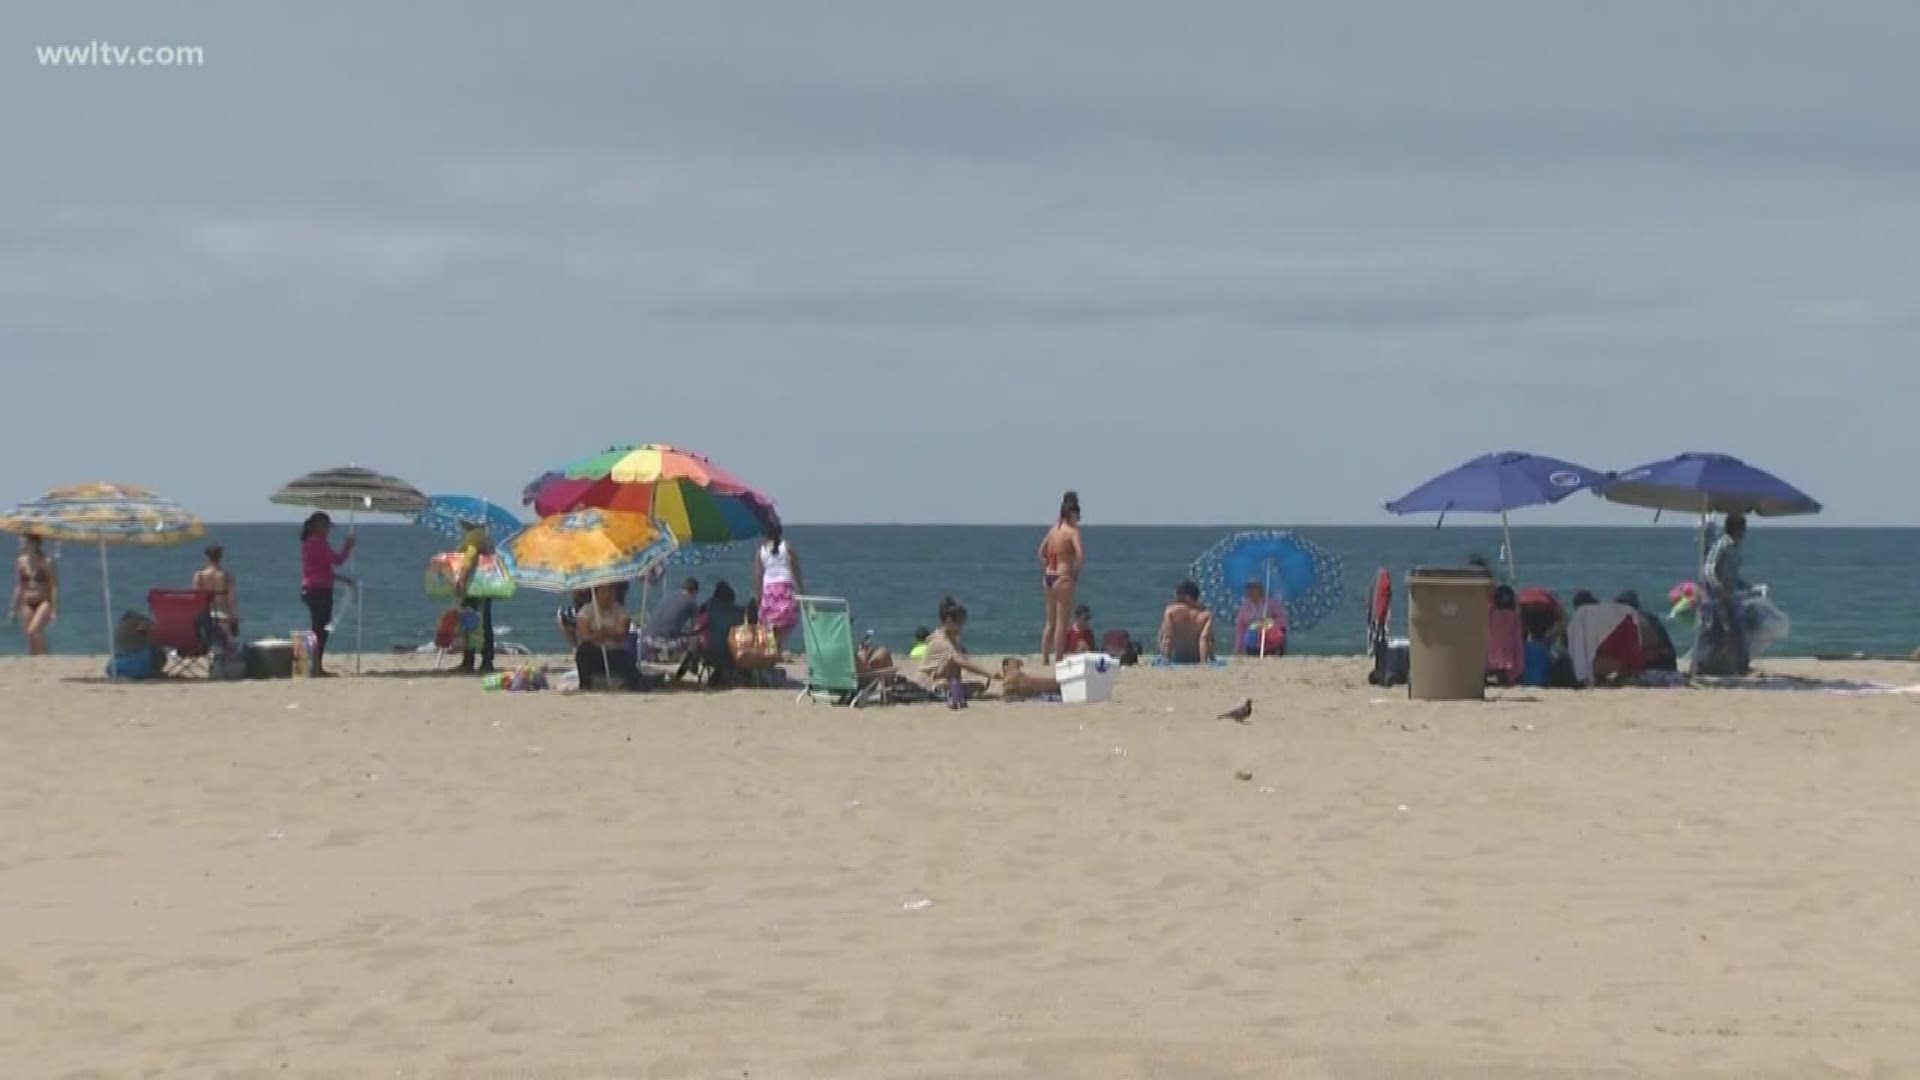 Dermatologists raise concerns about sunscreen as summer starts